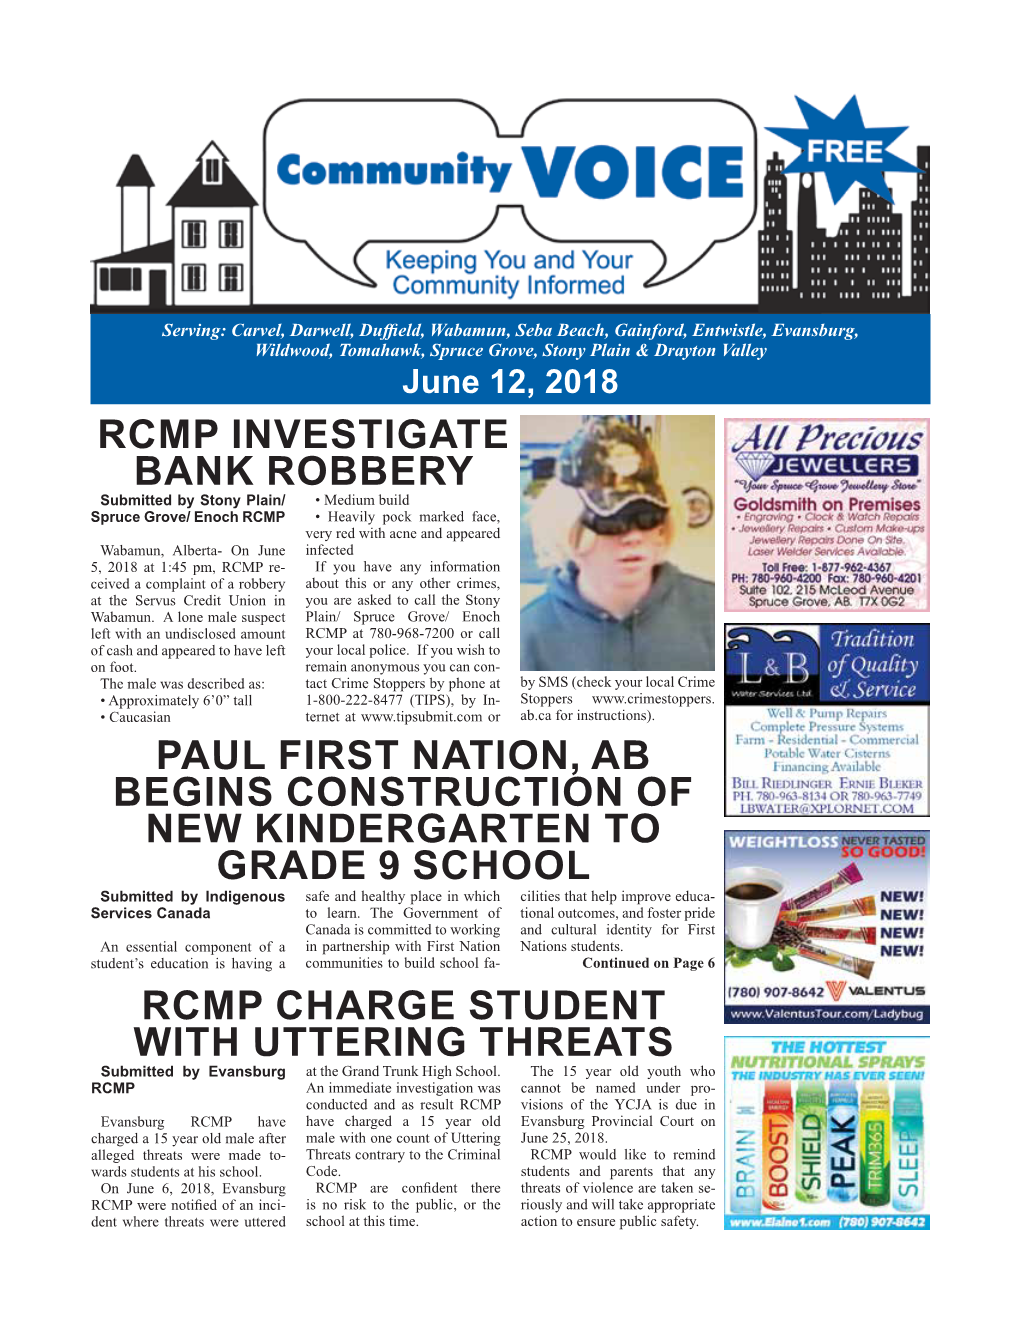 June 12, 2018 RCMP INVESTIGATE BANK ROBBERY PAUL FIRST NATION, AB BEGINS